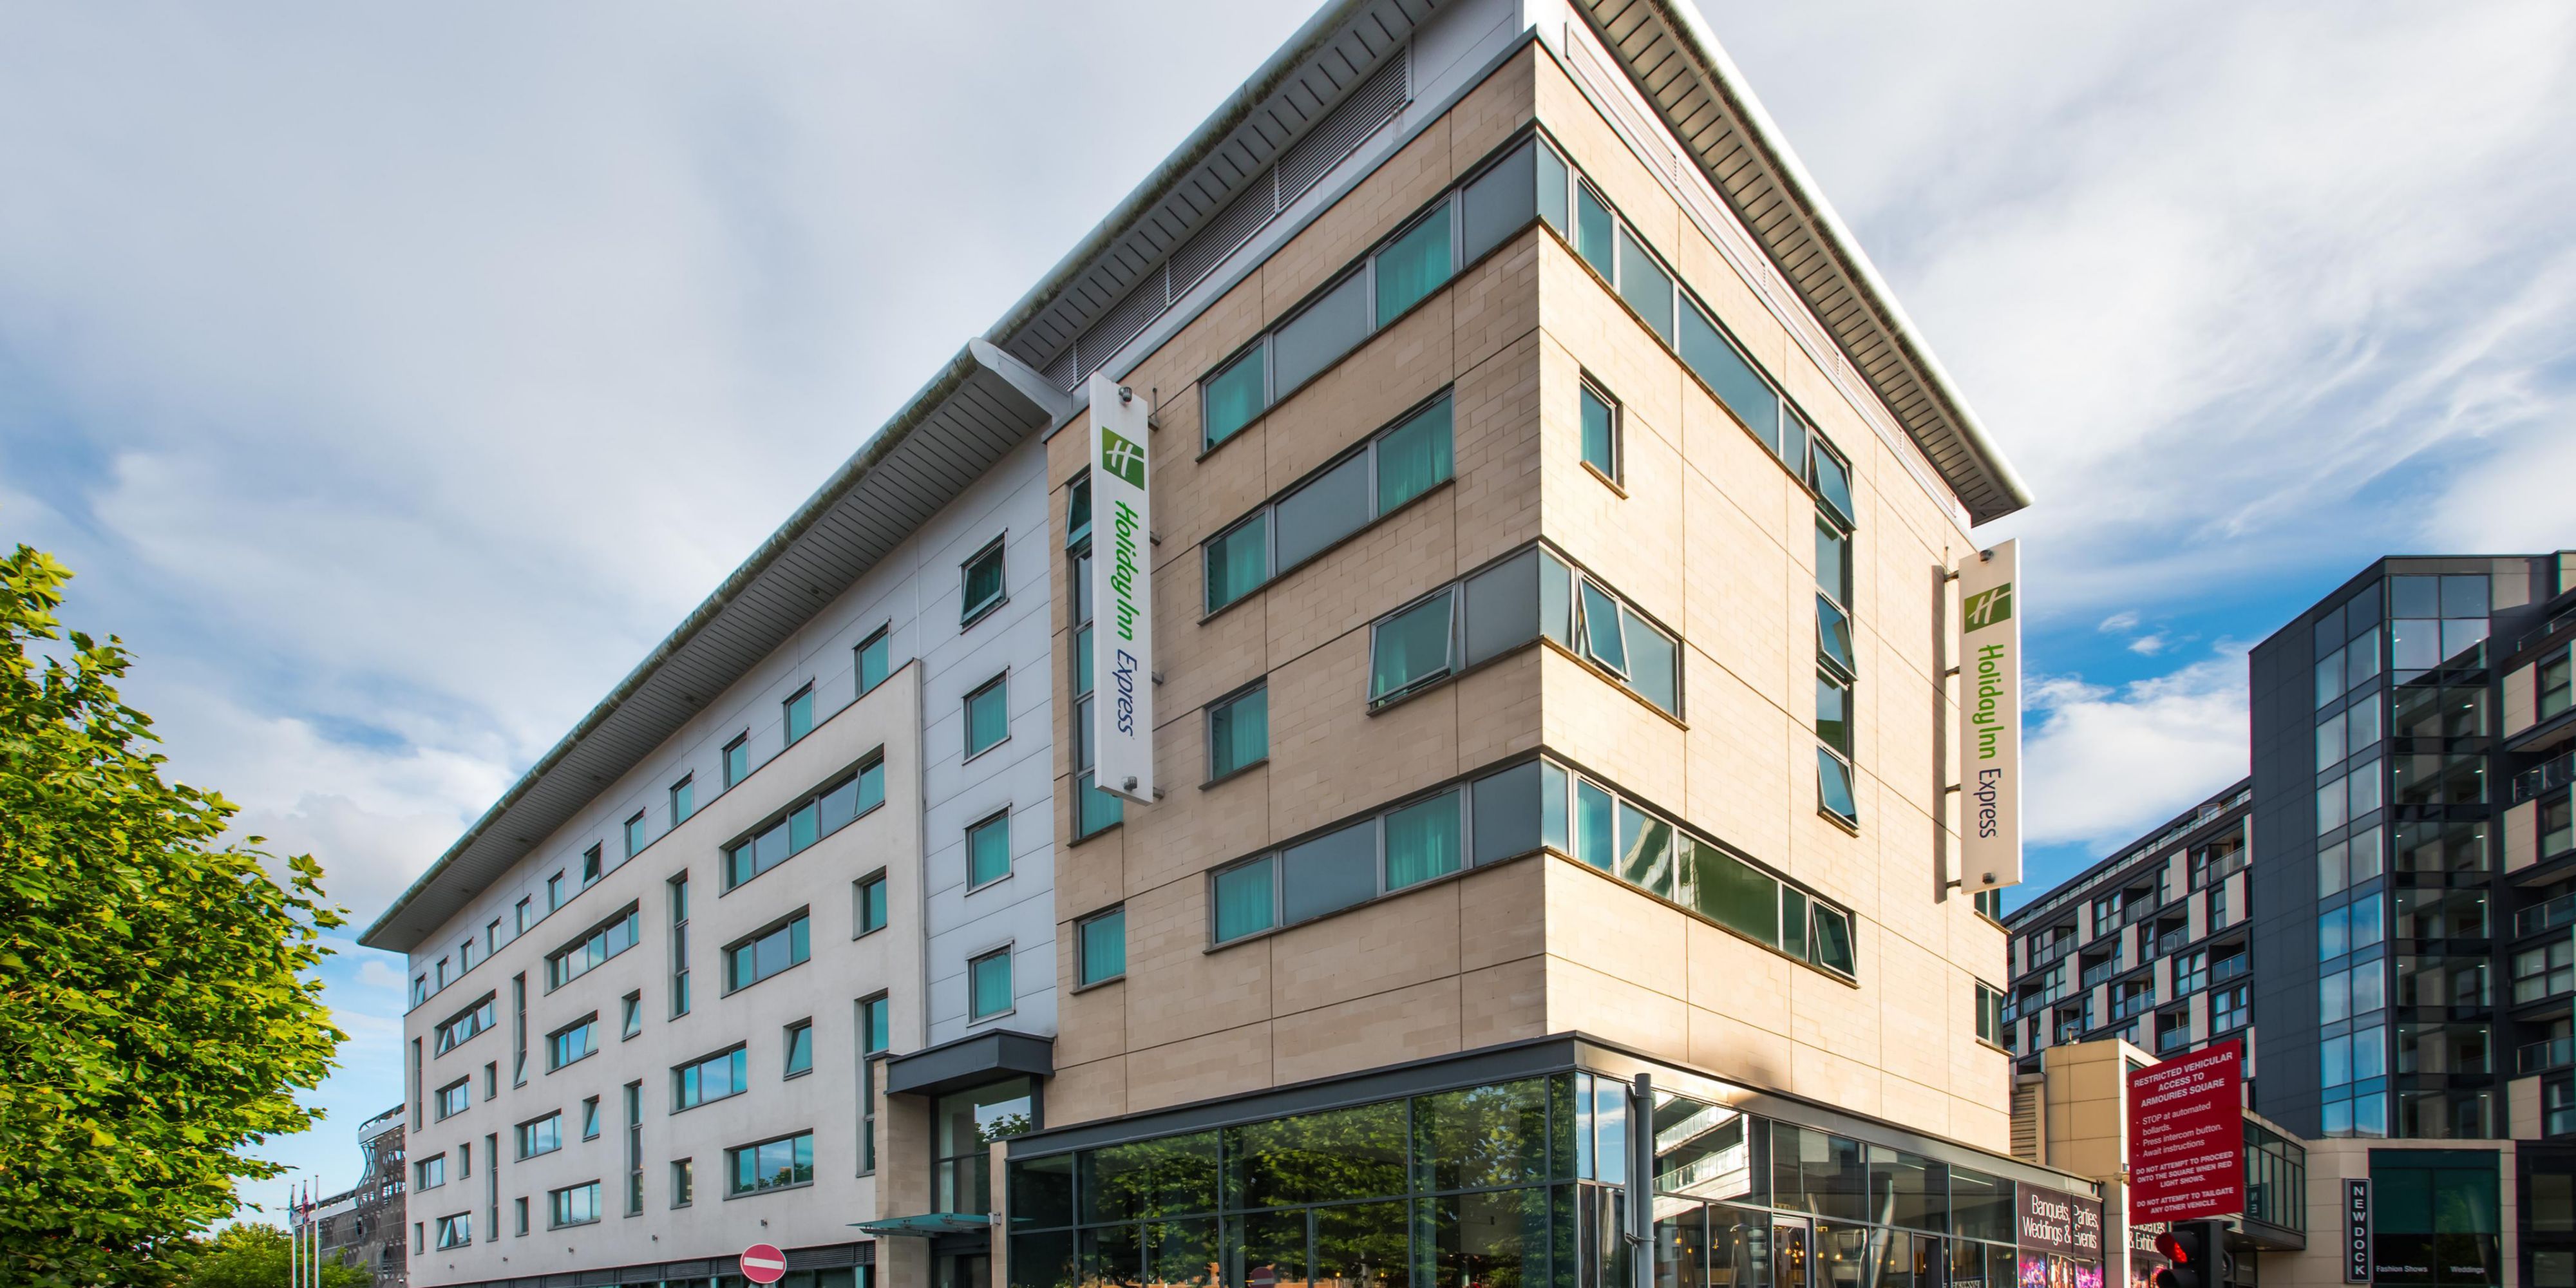 Leeds Dock is a thriving area and home to Holiday Inn Express